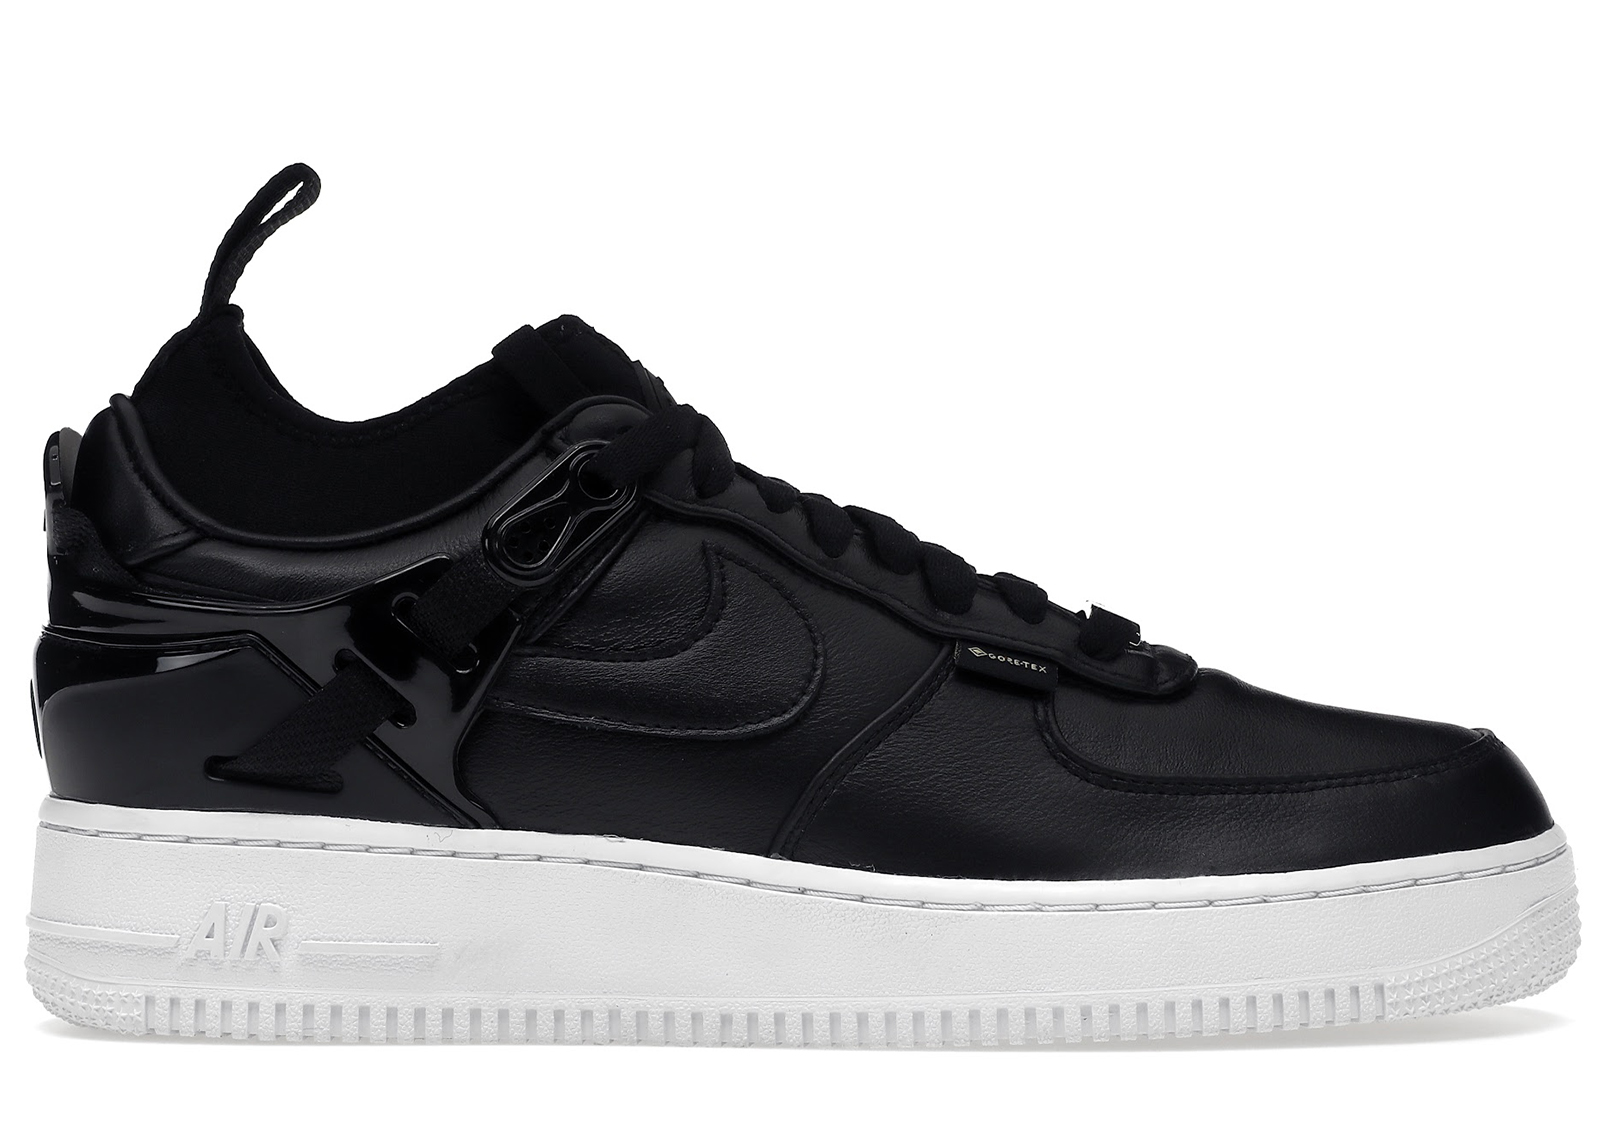 Nike Air Force 1 Low SP Undercover Black Men's - DQ7558-002 - US